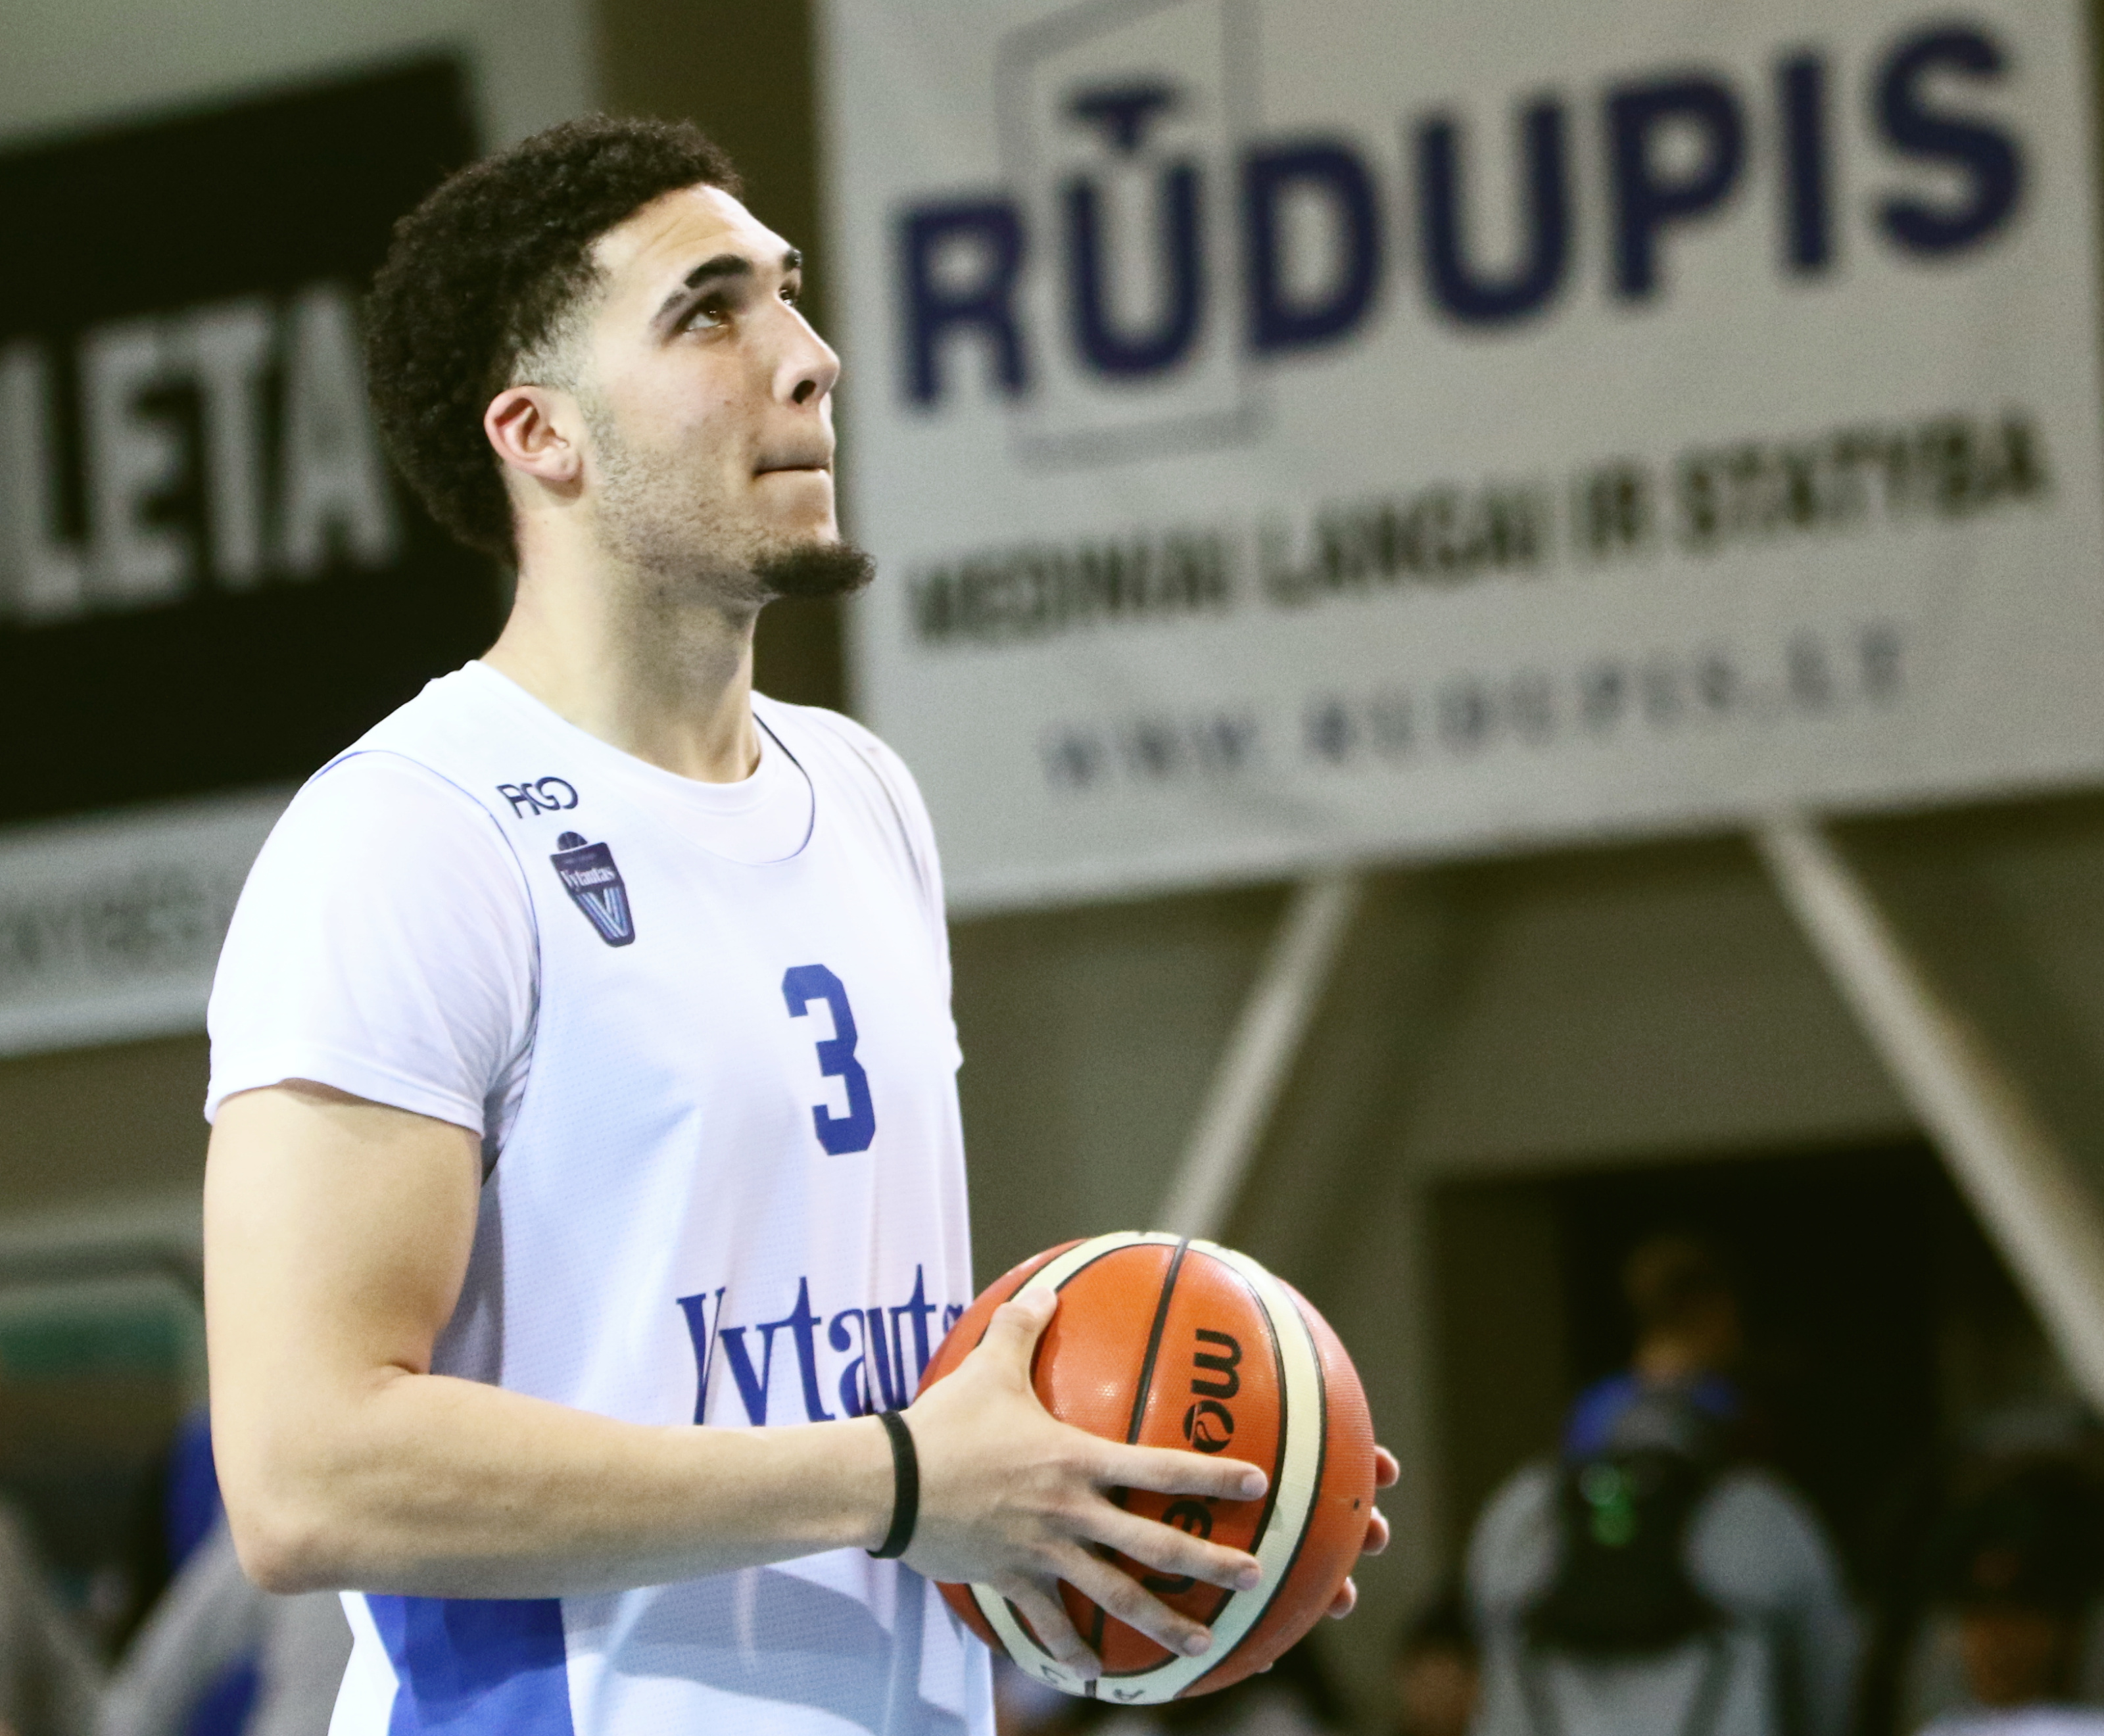 LiAngelo Ball joins brother LaMelo on non-guaranteed deal in